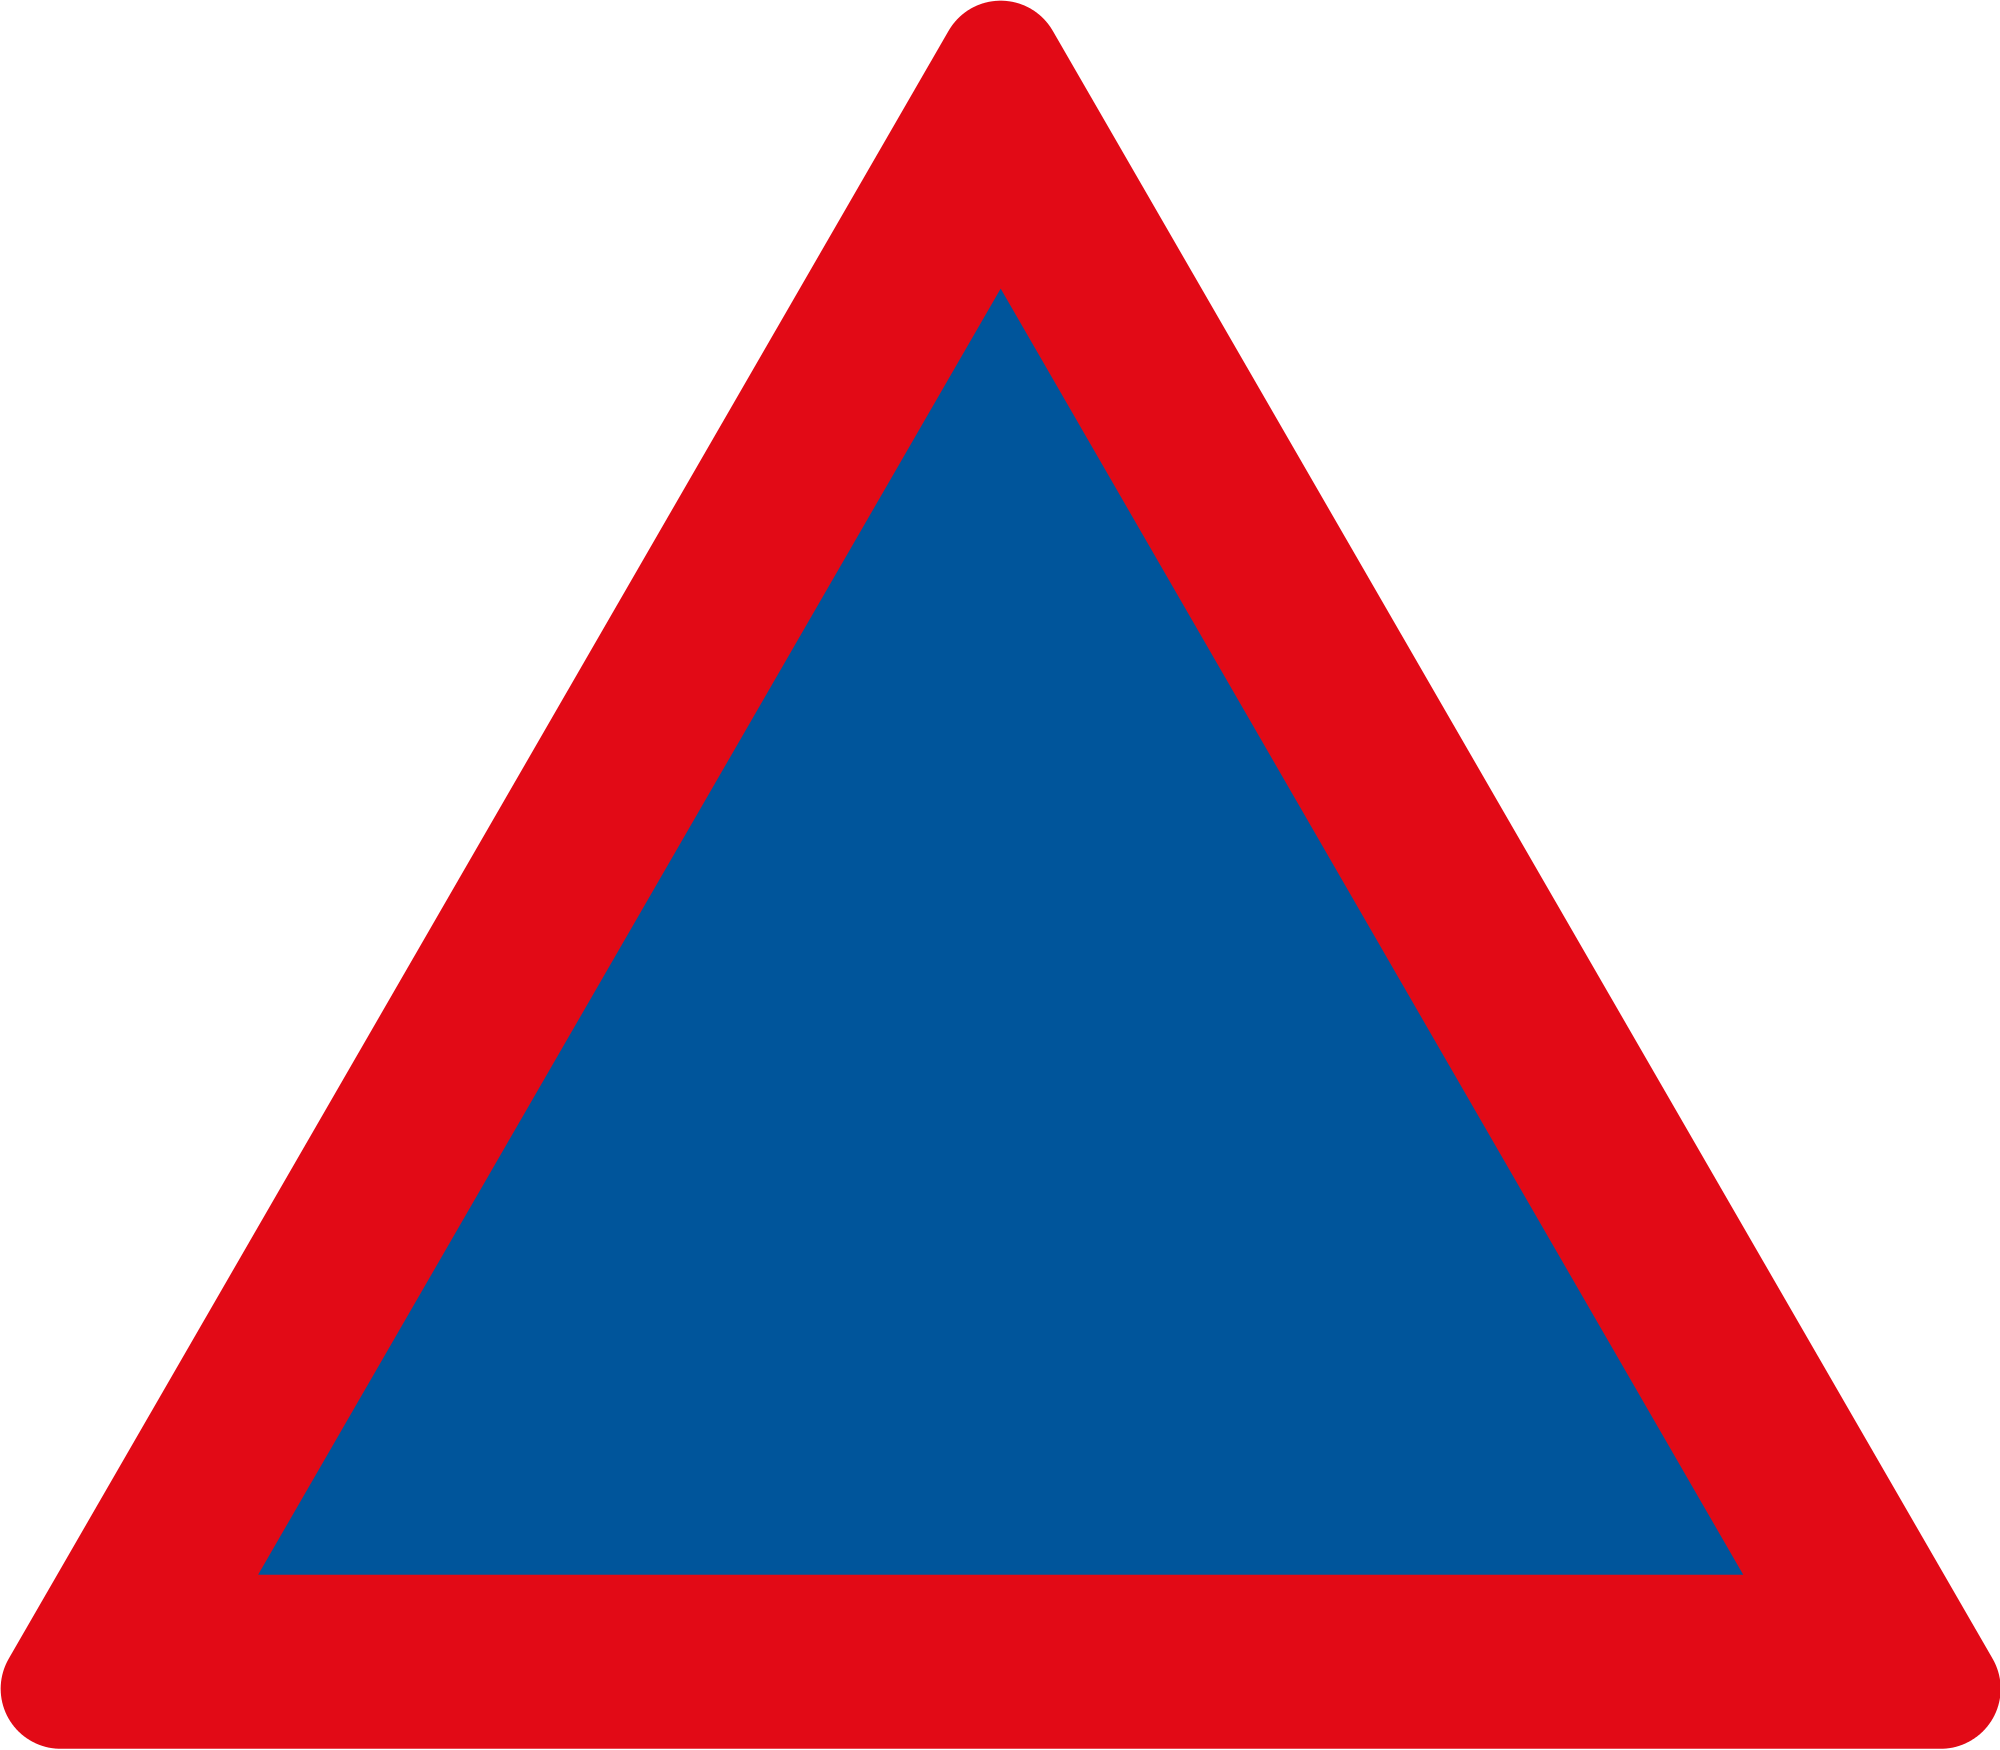 Blue with a Red Triangle Logo - File:Triangle warning sign (red and blue).svg - Wikimedia Commons